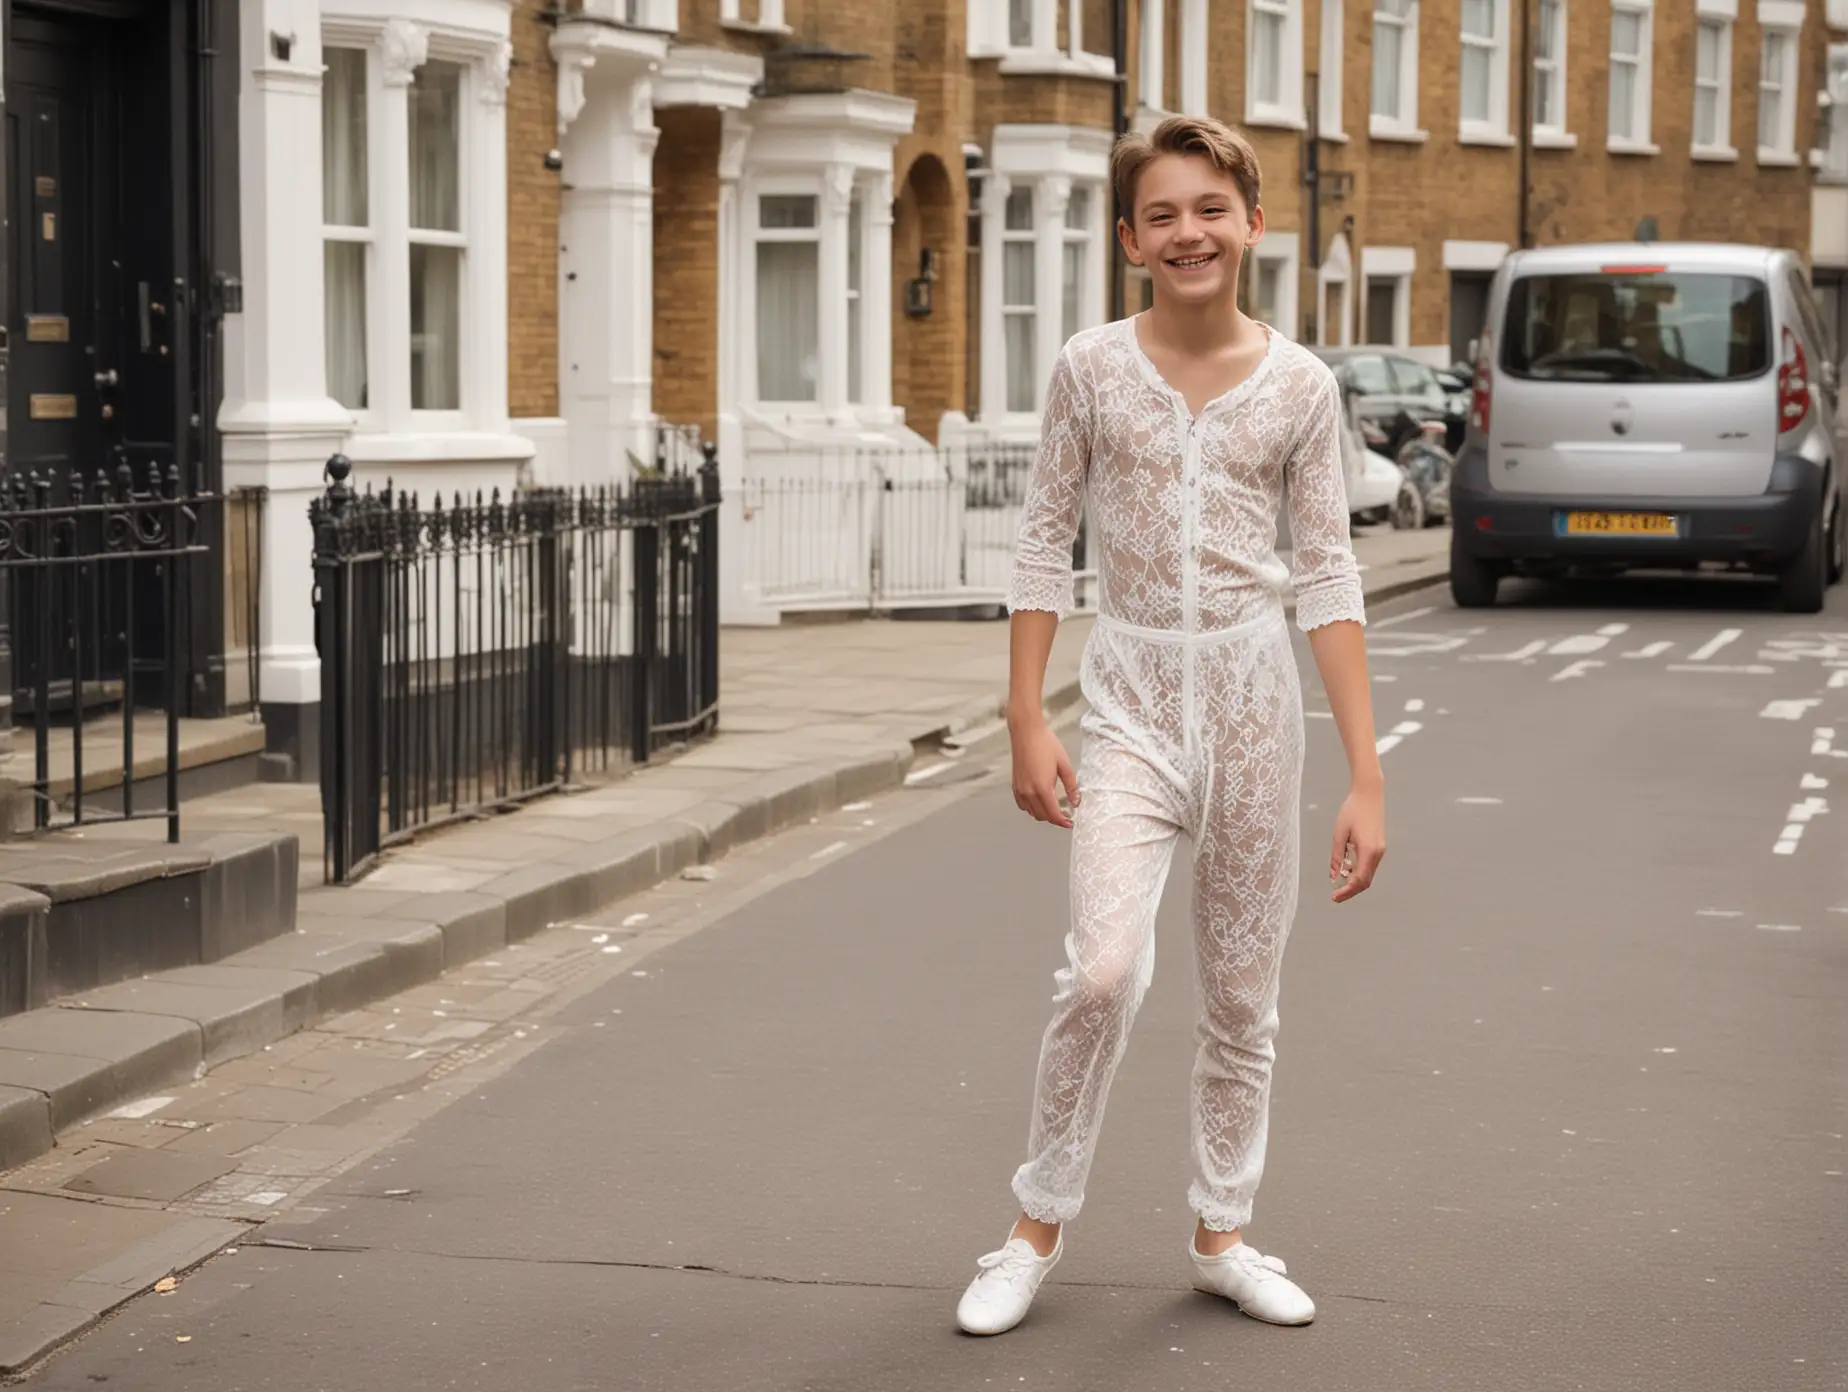 Smiling-Teen-Boy-in-White-Lace-Jumpsuit-and-Ballet-Shoes-on-London-Street